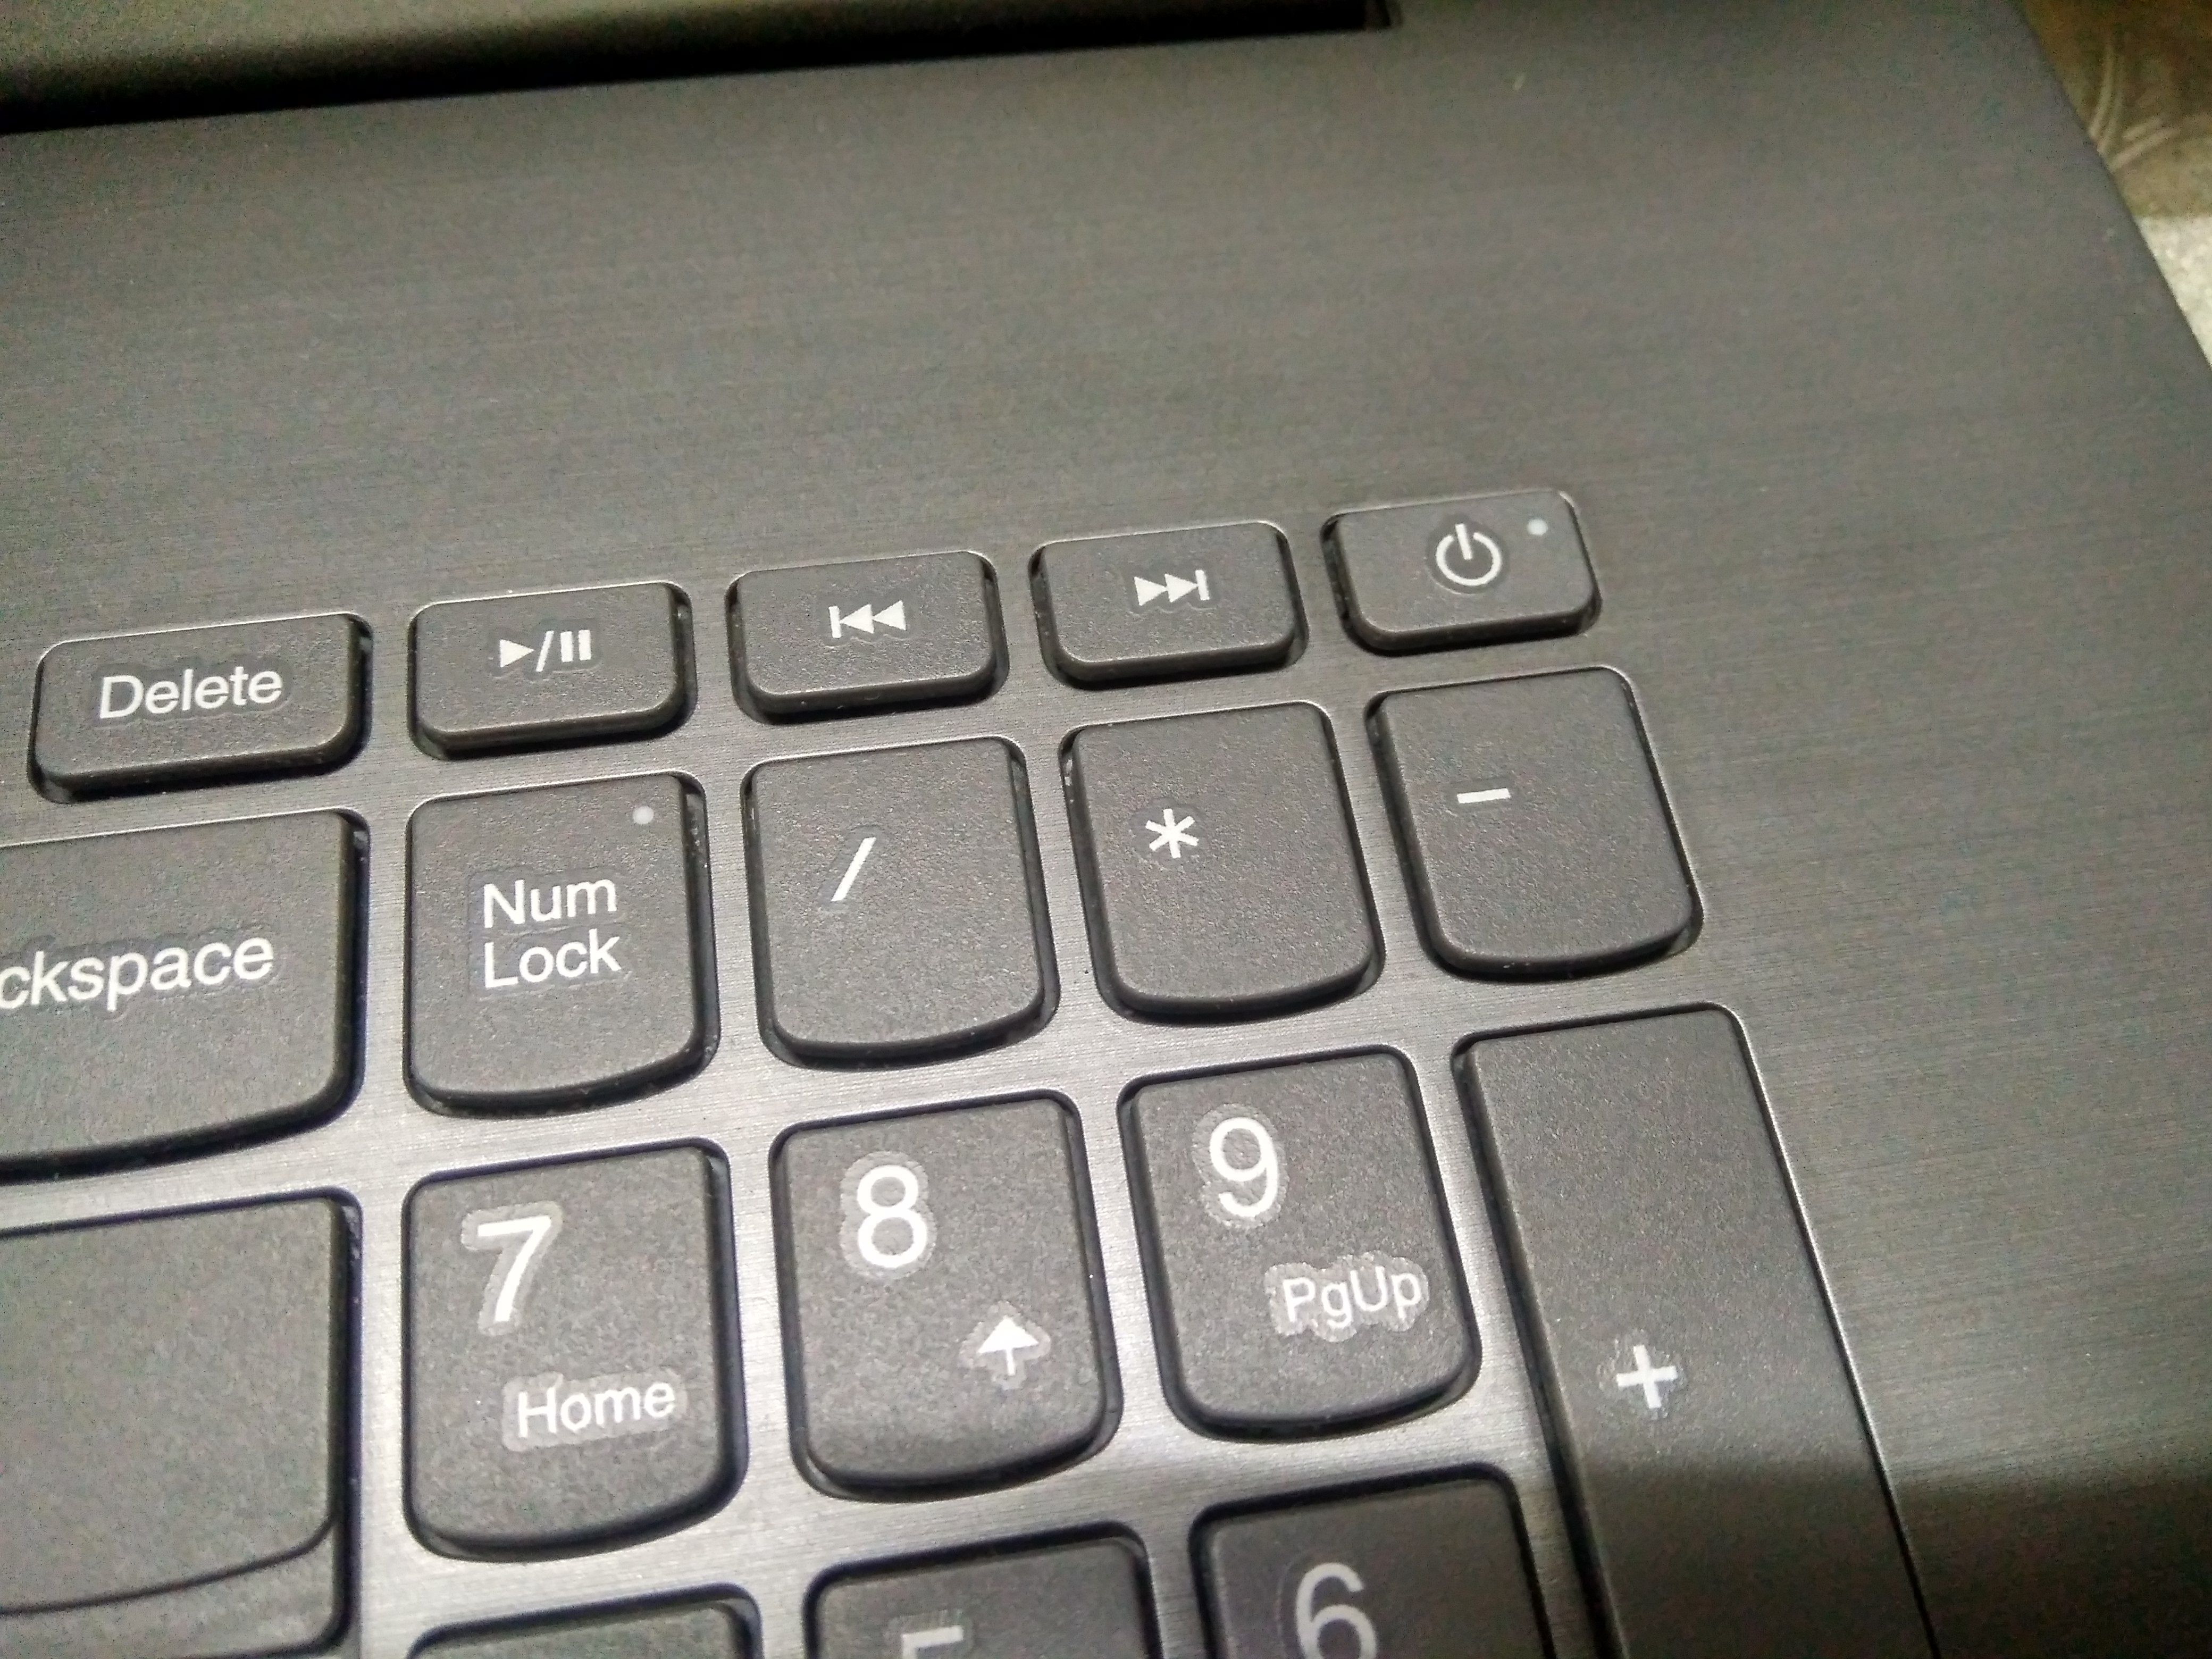 my lenovo keyboard is not working